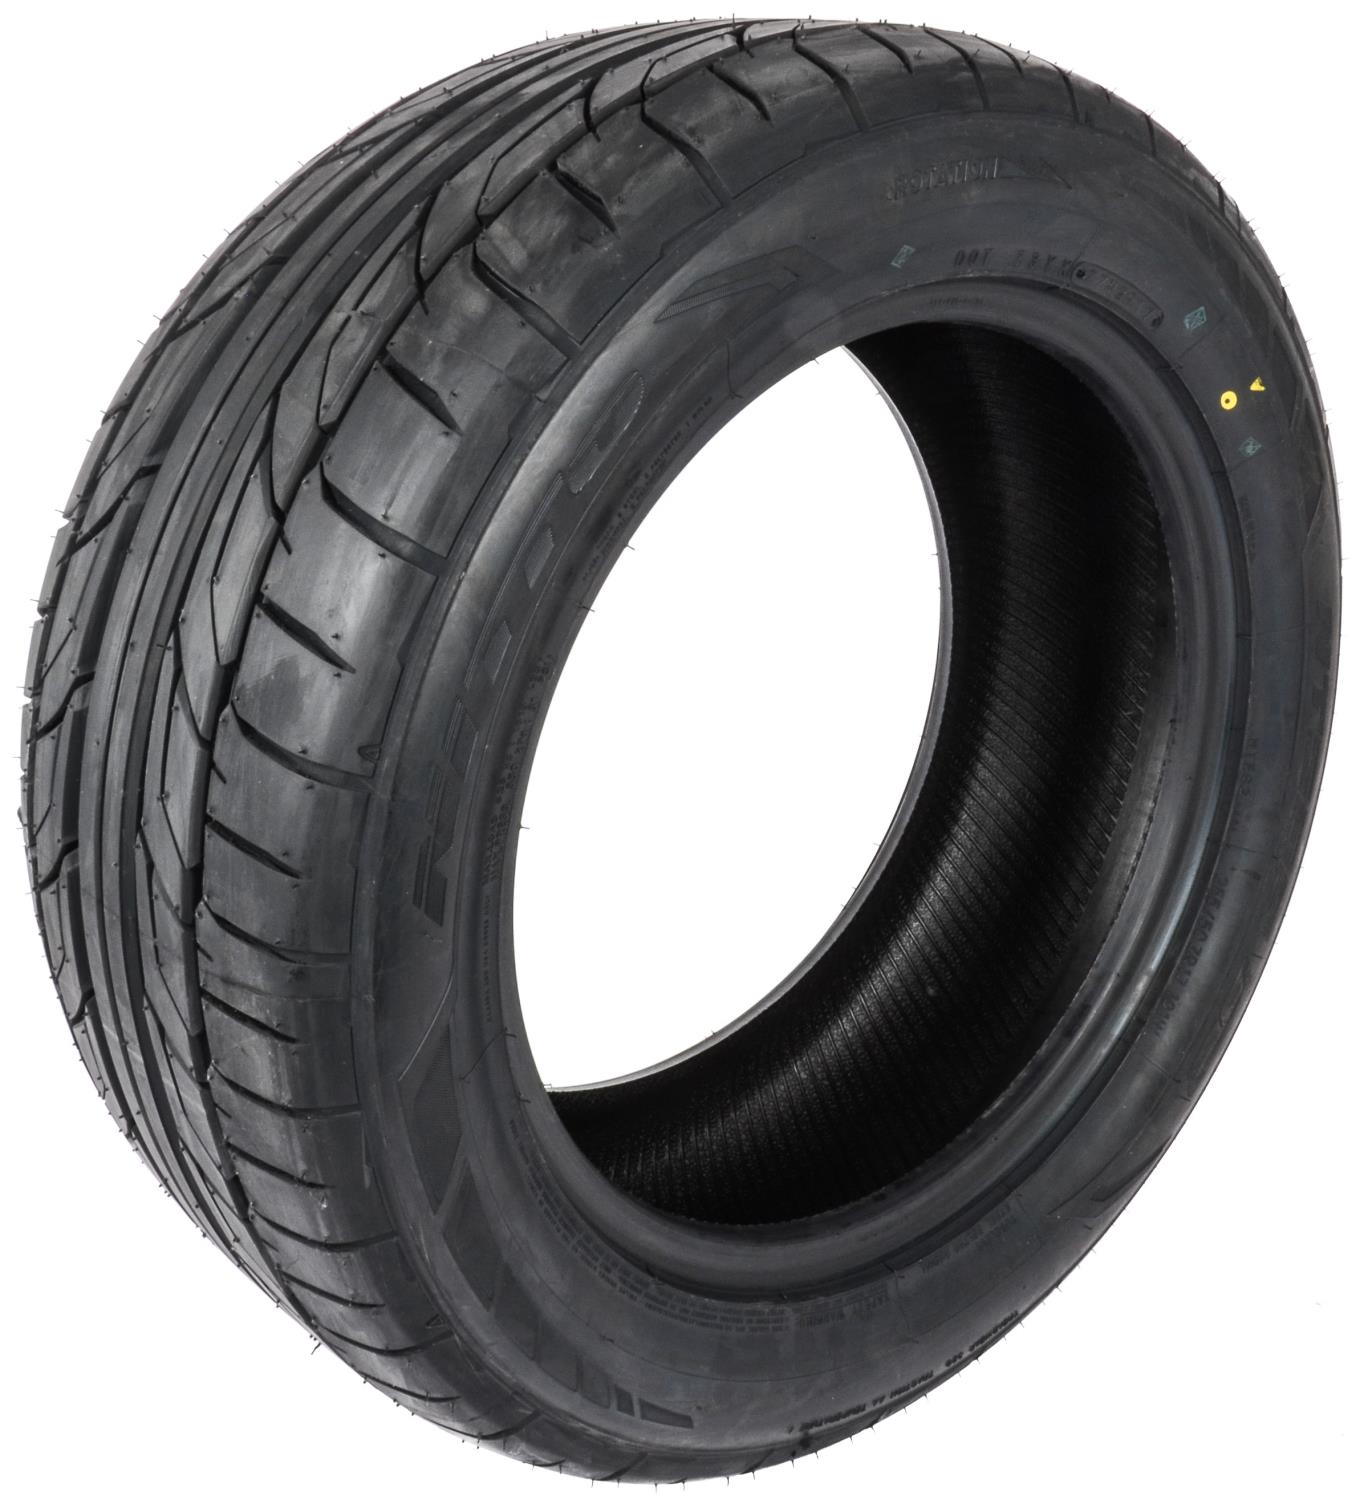 NT555 G2 Summer UHP Radial Tire 255/50R17